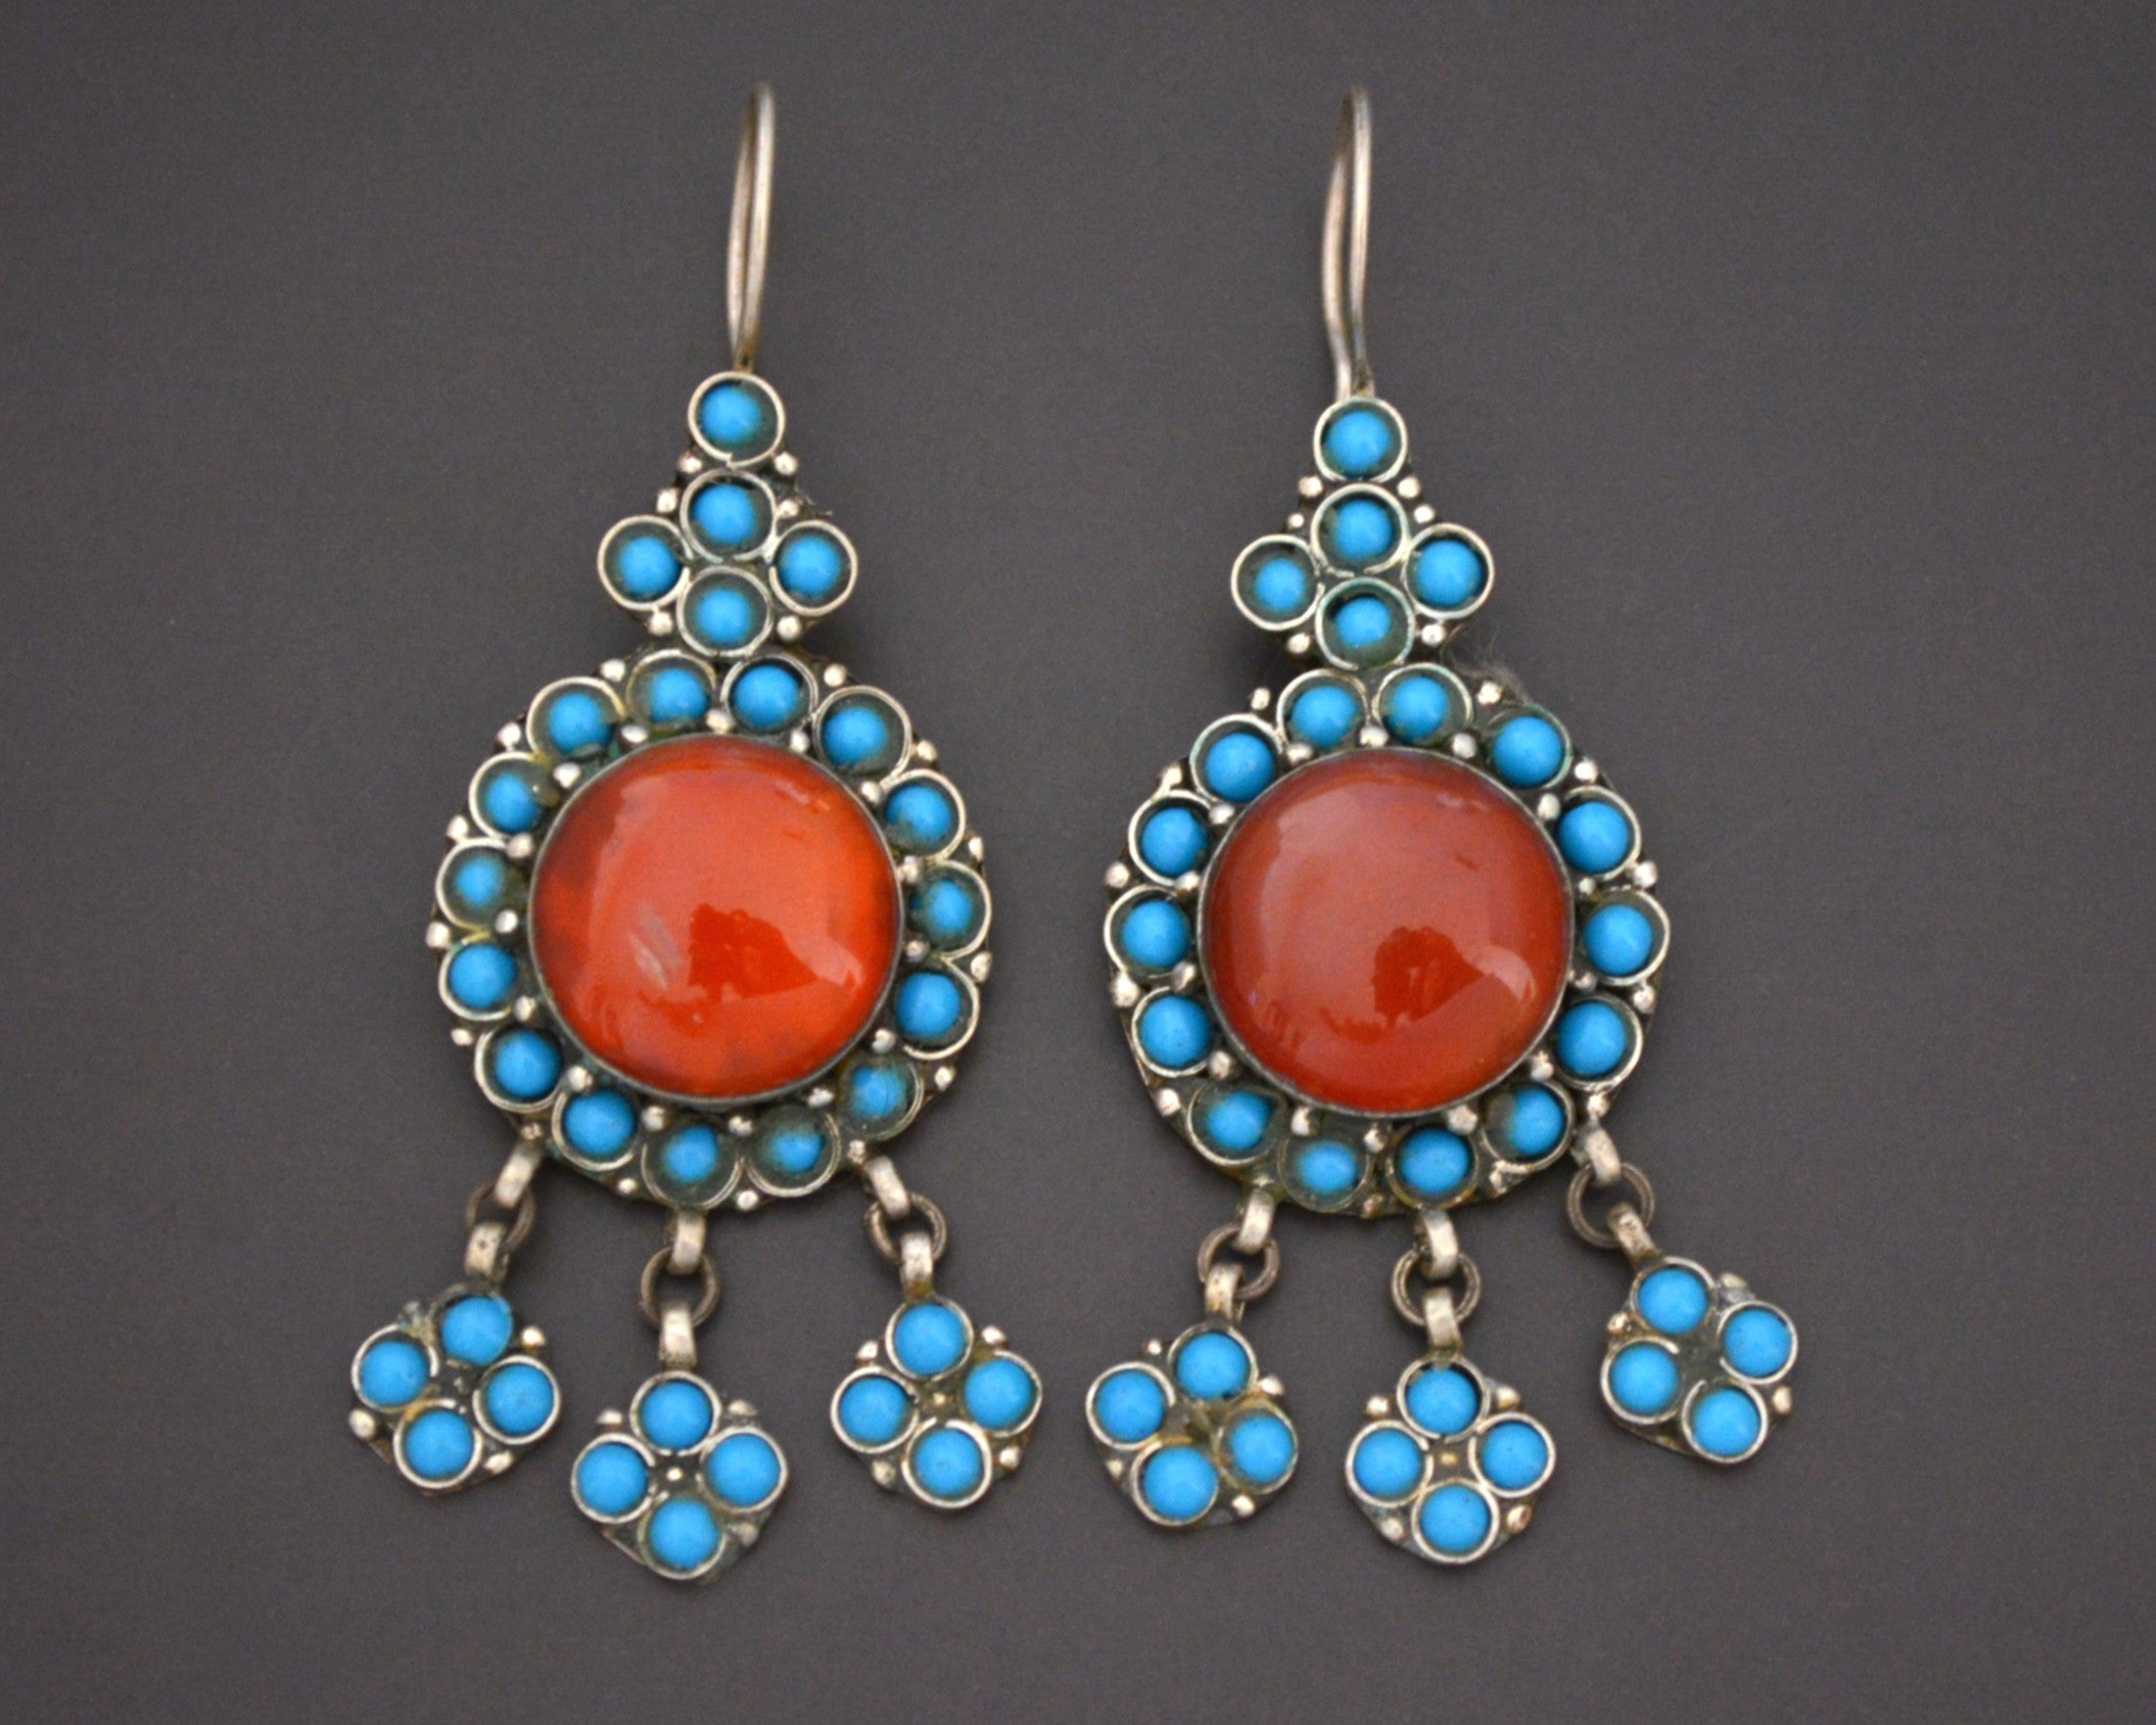 Vintage Turkmen Earrings with Carnelian and Turquoise